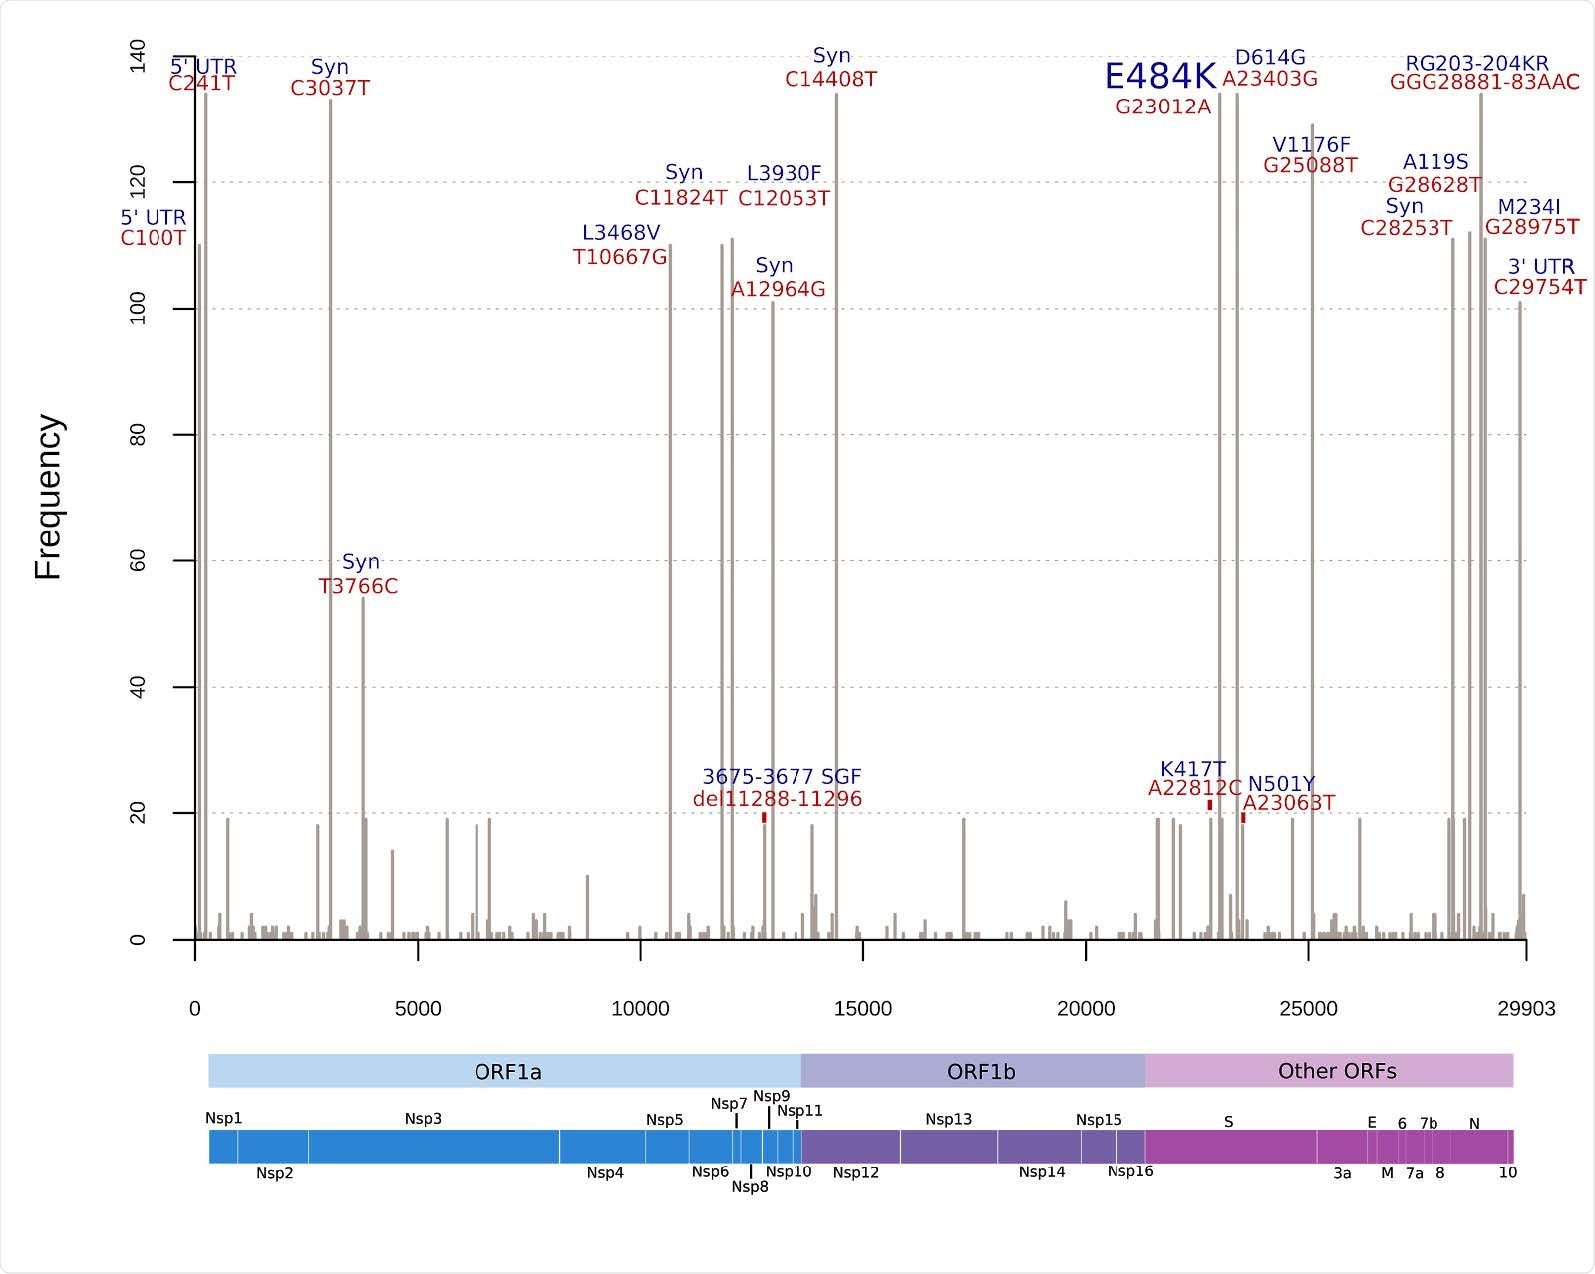 Histogram of frequent mutations observed in the Brazilian SARS-CoV-2 genomes harboring E484K mutation. Red labels above the bars indicate absolute nucleotide position and the blue labels indicate effects of these mutations in the corresponding proteins. As P.1 has only 19 genomes represented and multiple mutations, only main mutations of concern were highlighted. UTR: Untranslated region; Syn: Synonymous substitution; del: deletion; ORF: Open Reading Frame; Nsp: Non-structural protein; S: Spike; E: Envelope; M: Membrane; N: Nucleocapsid.